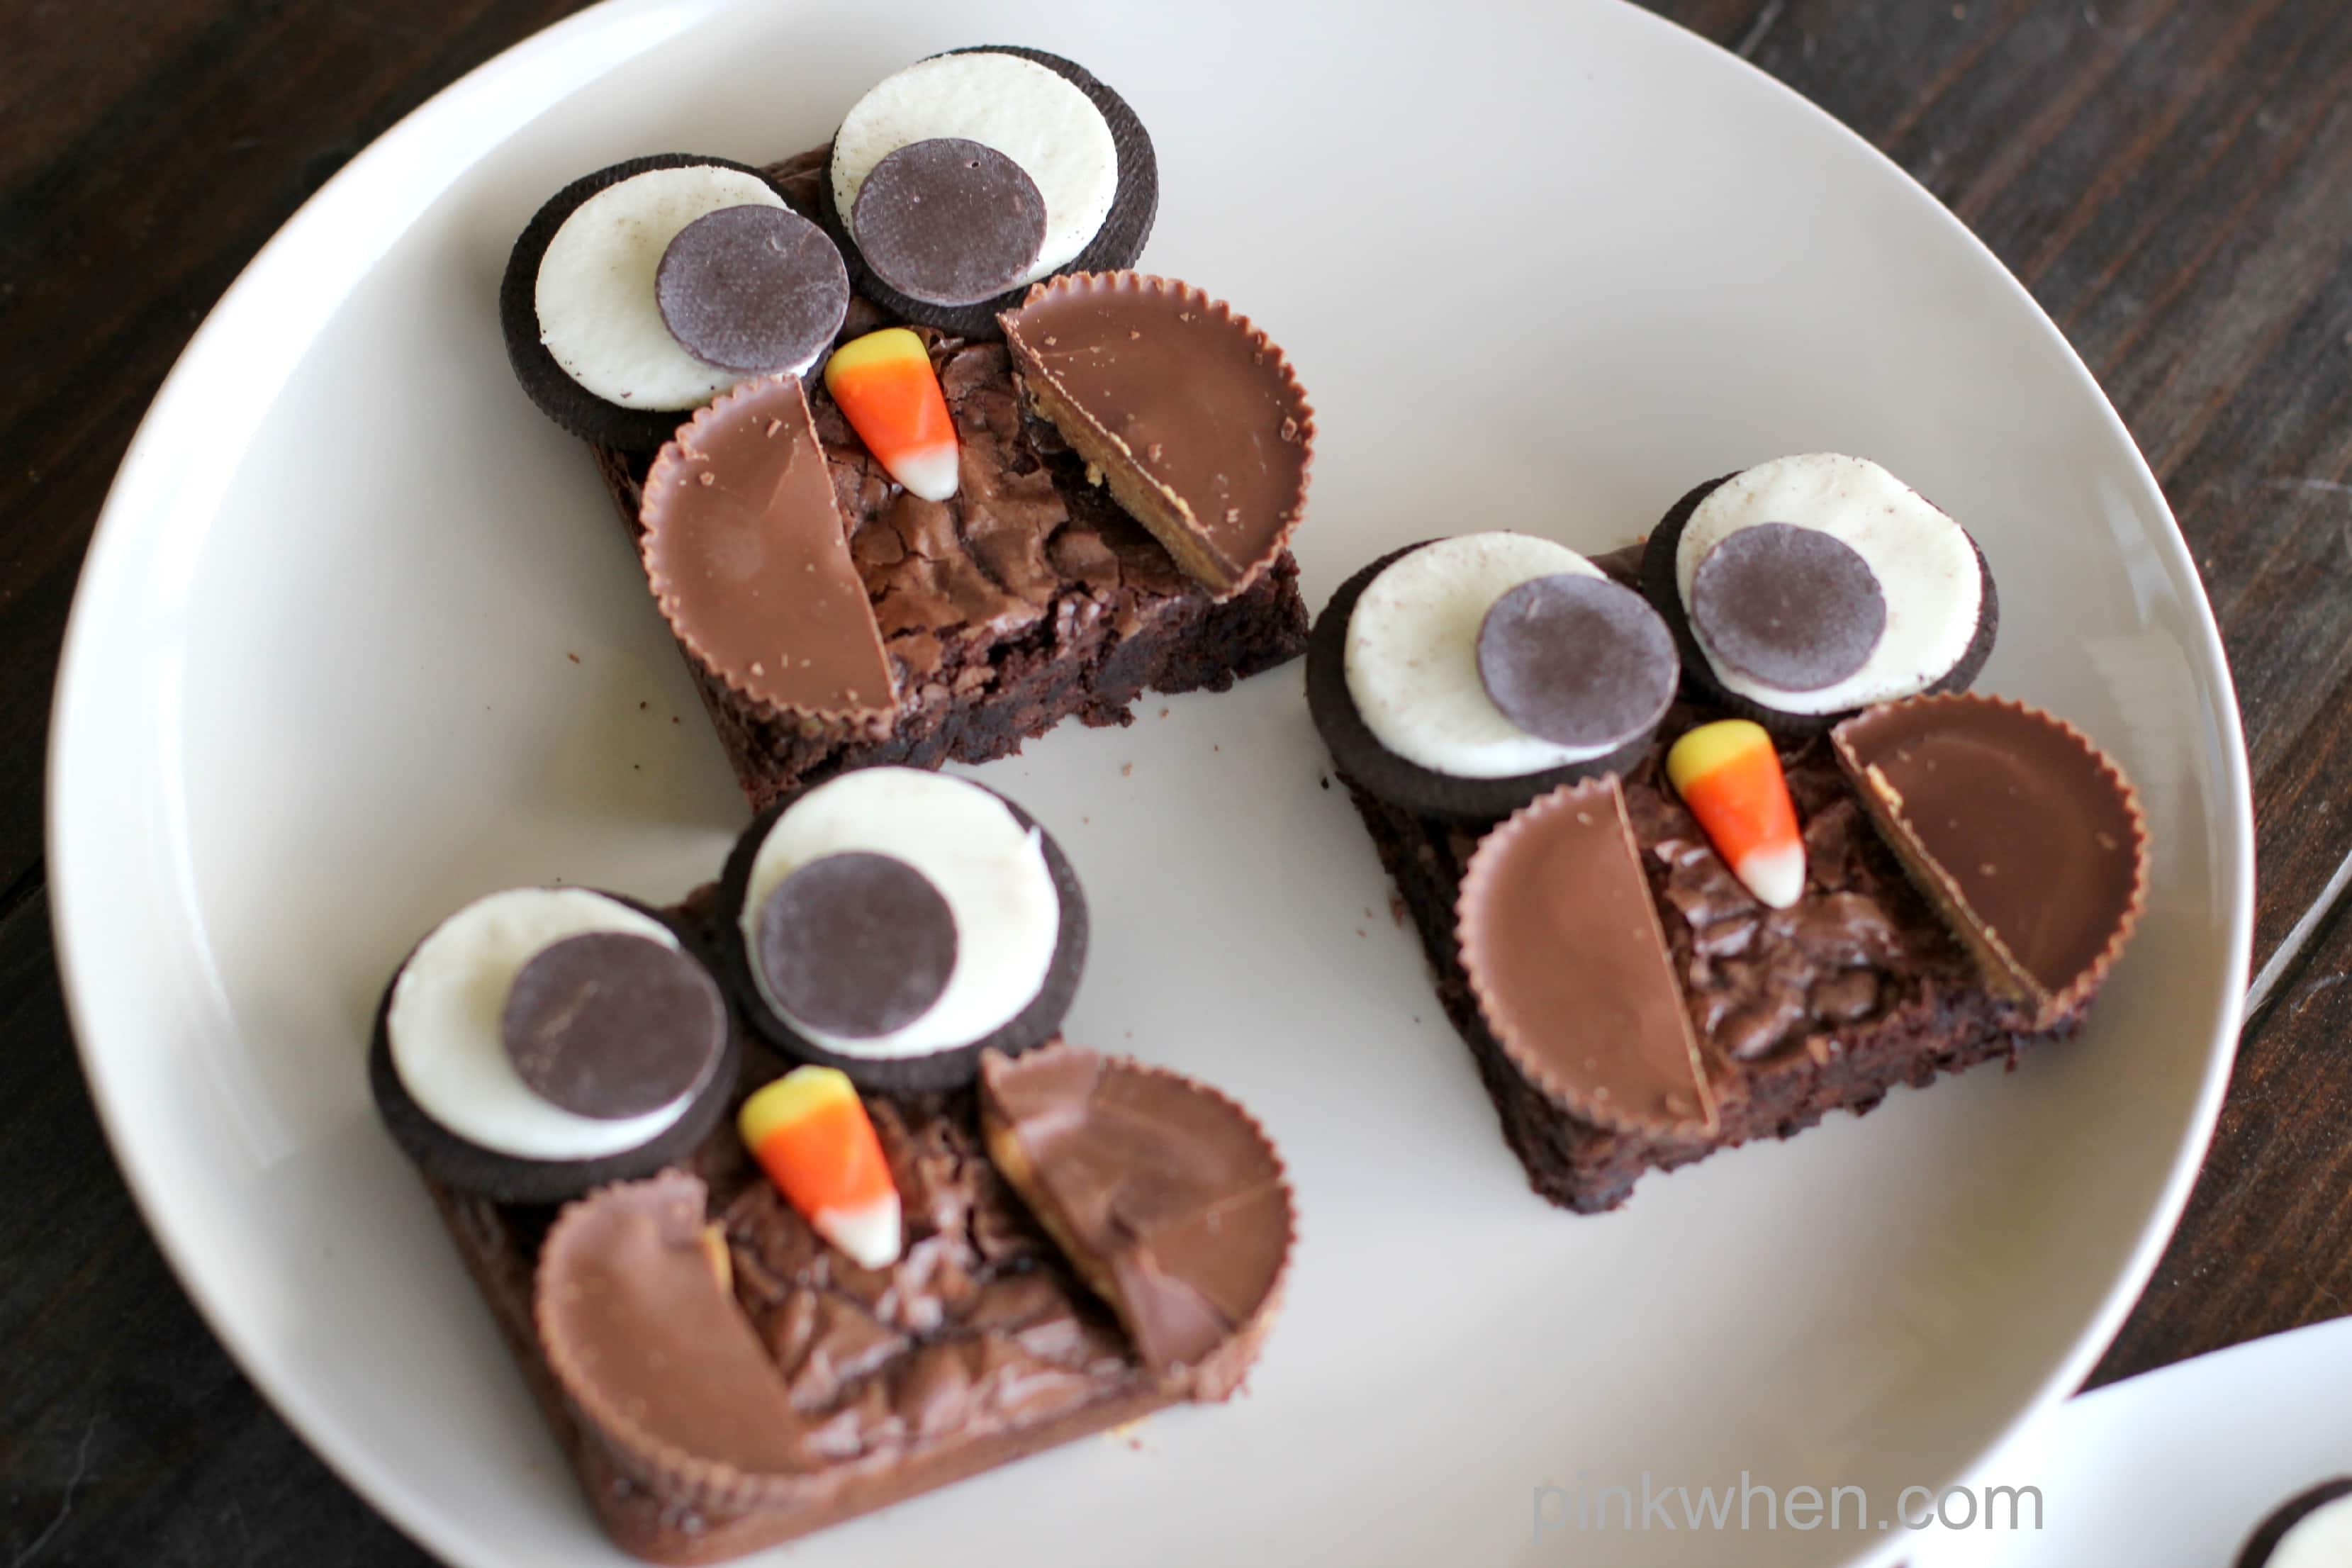 Yummy Brownie Owl Treats from PinkWhen.com